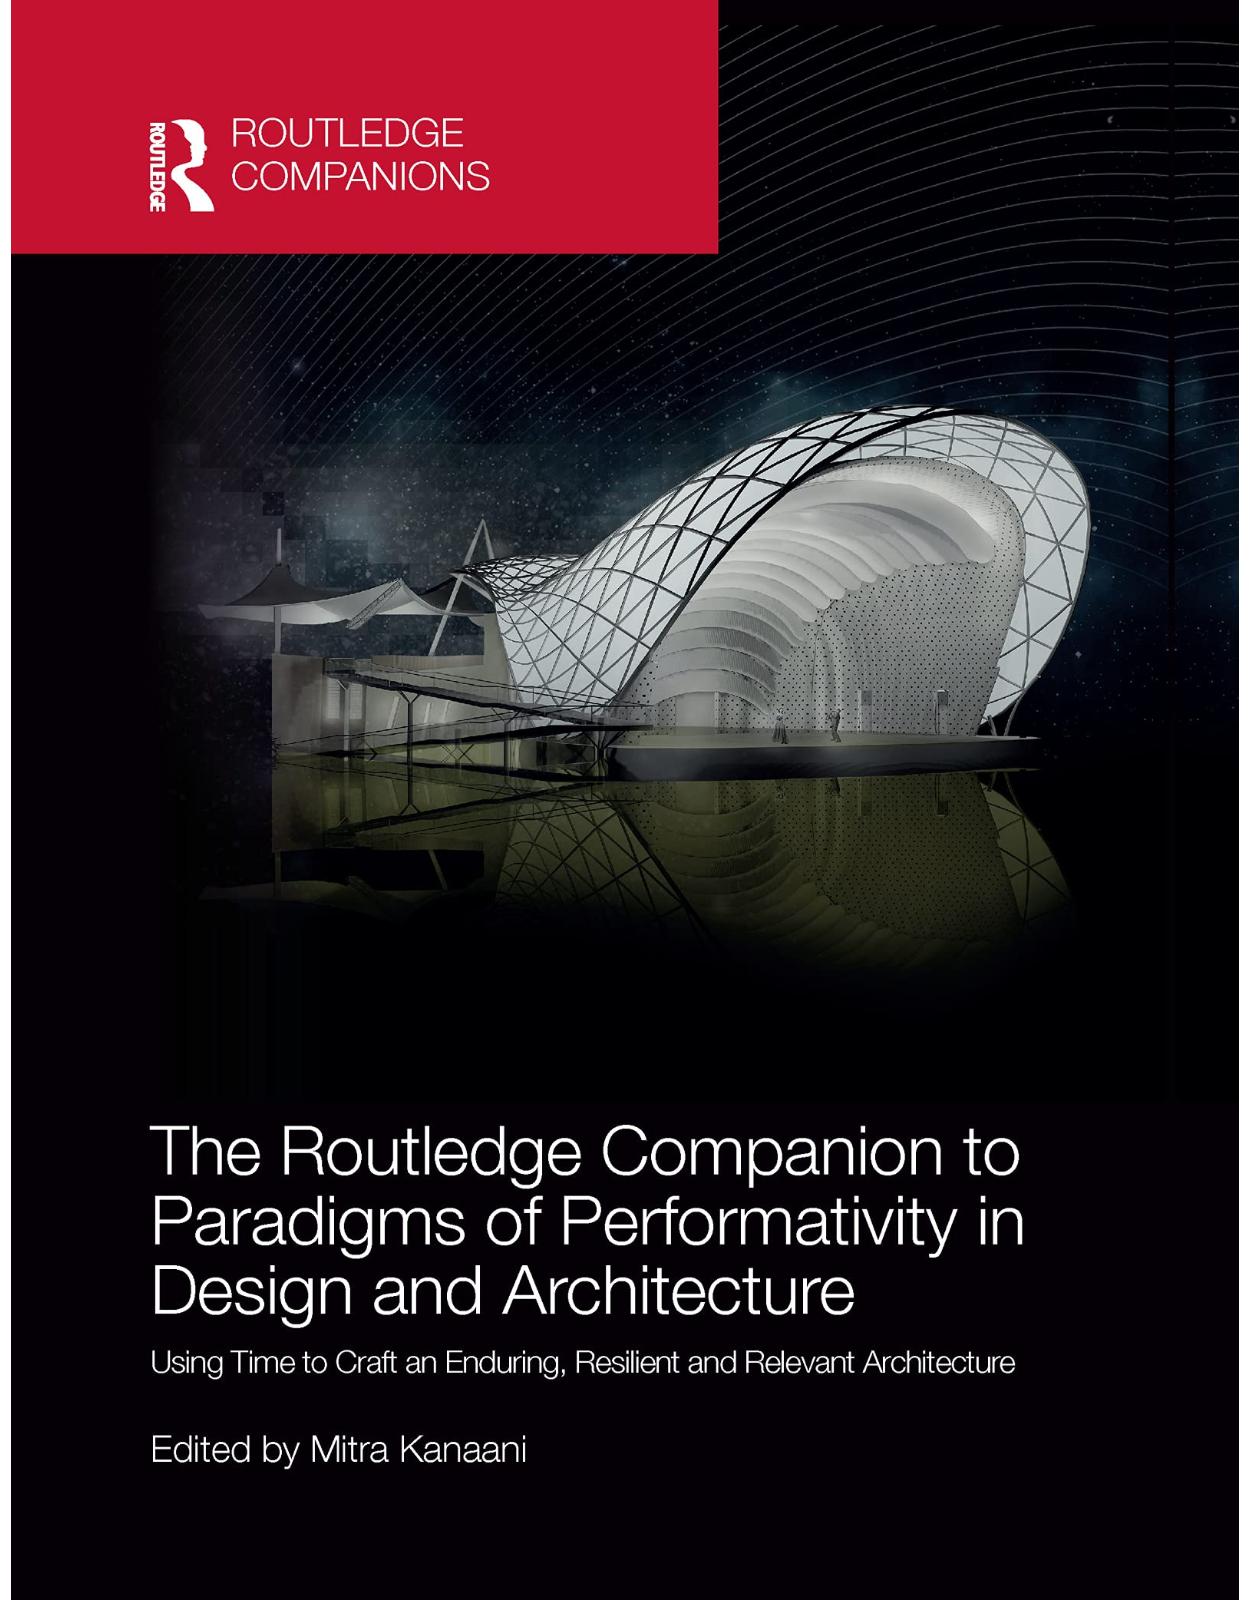 The Routledge Companion to Paradigms of Performativity in Design and Architecture: Using Time to Craft an Enduring, Resilient and Relevant Architecture